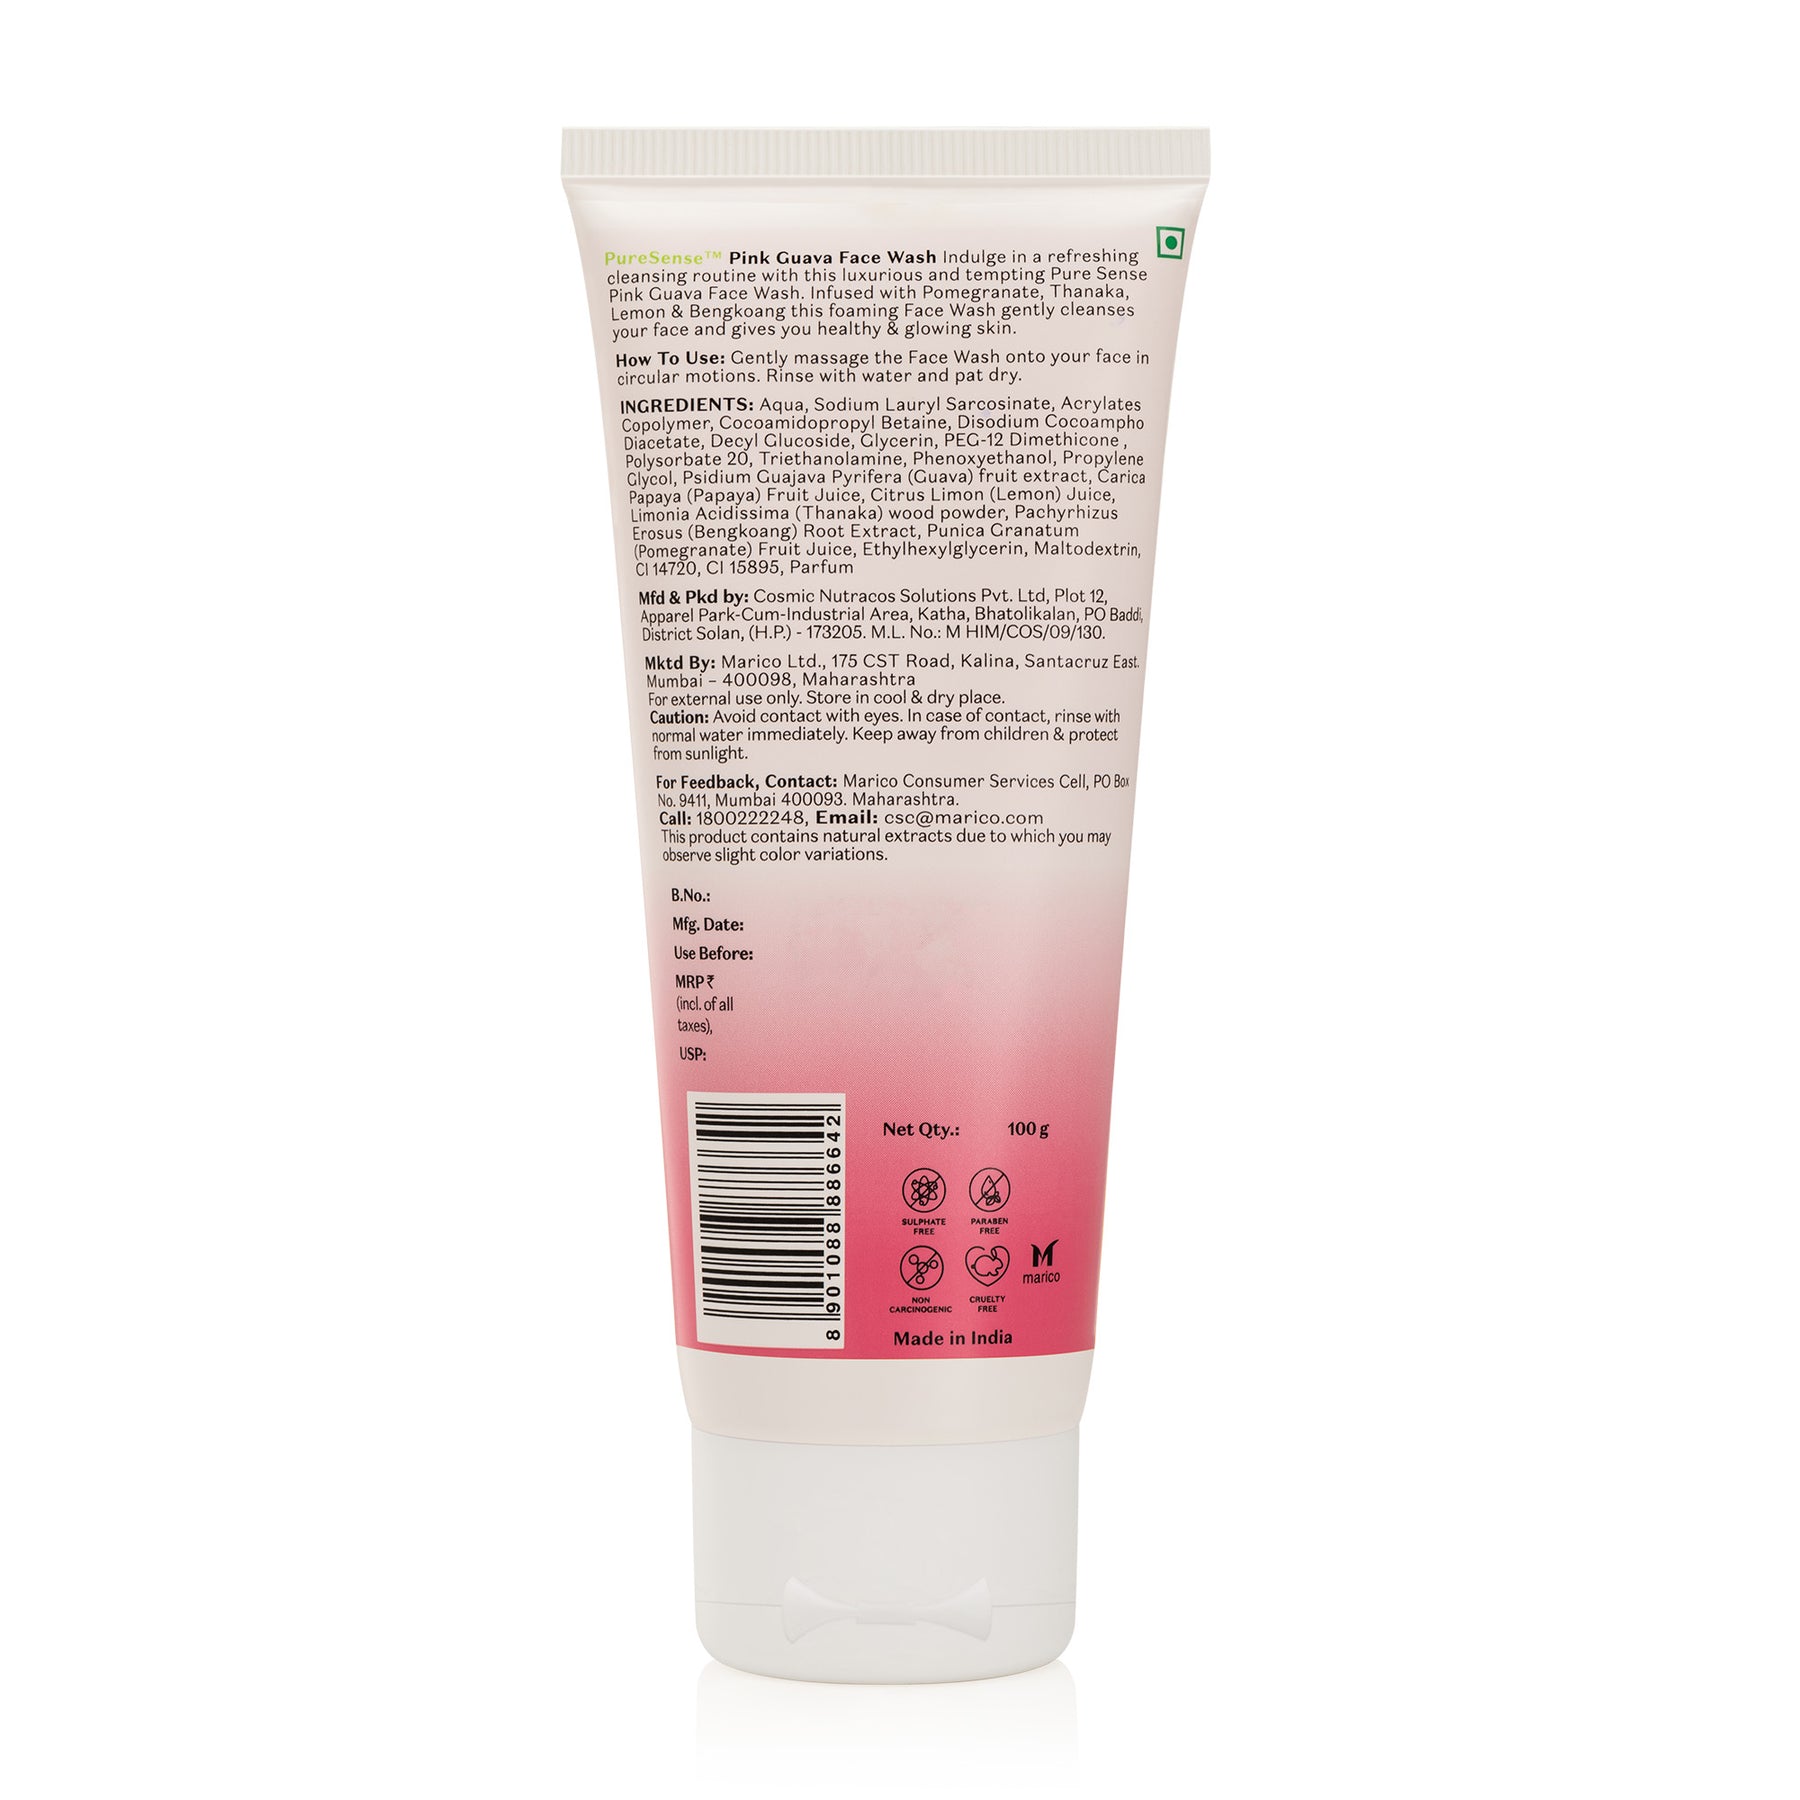 Pink Guava Face Wash | From the makers of Parachute Advansed | 100ml - PureSense